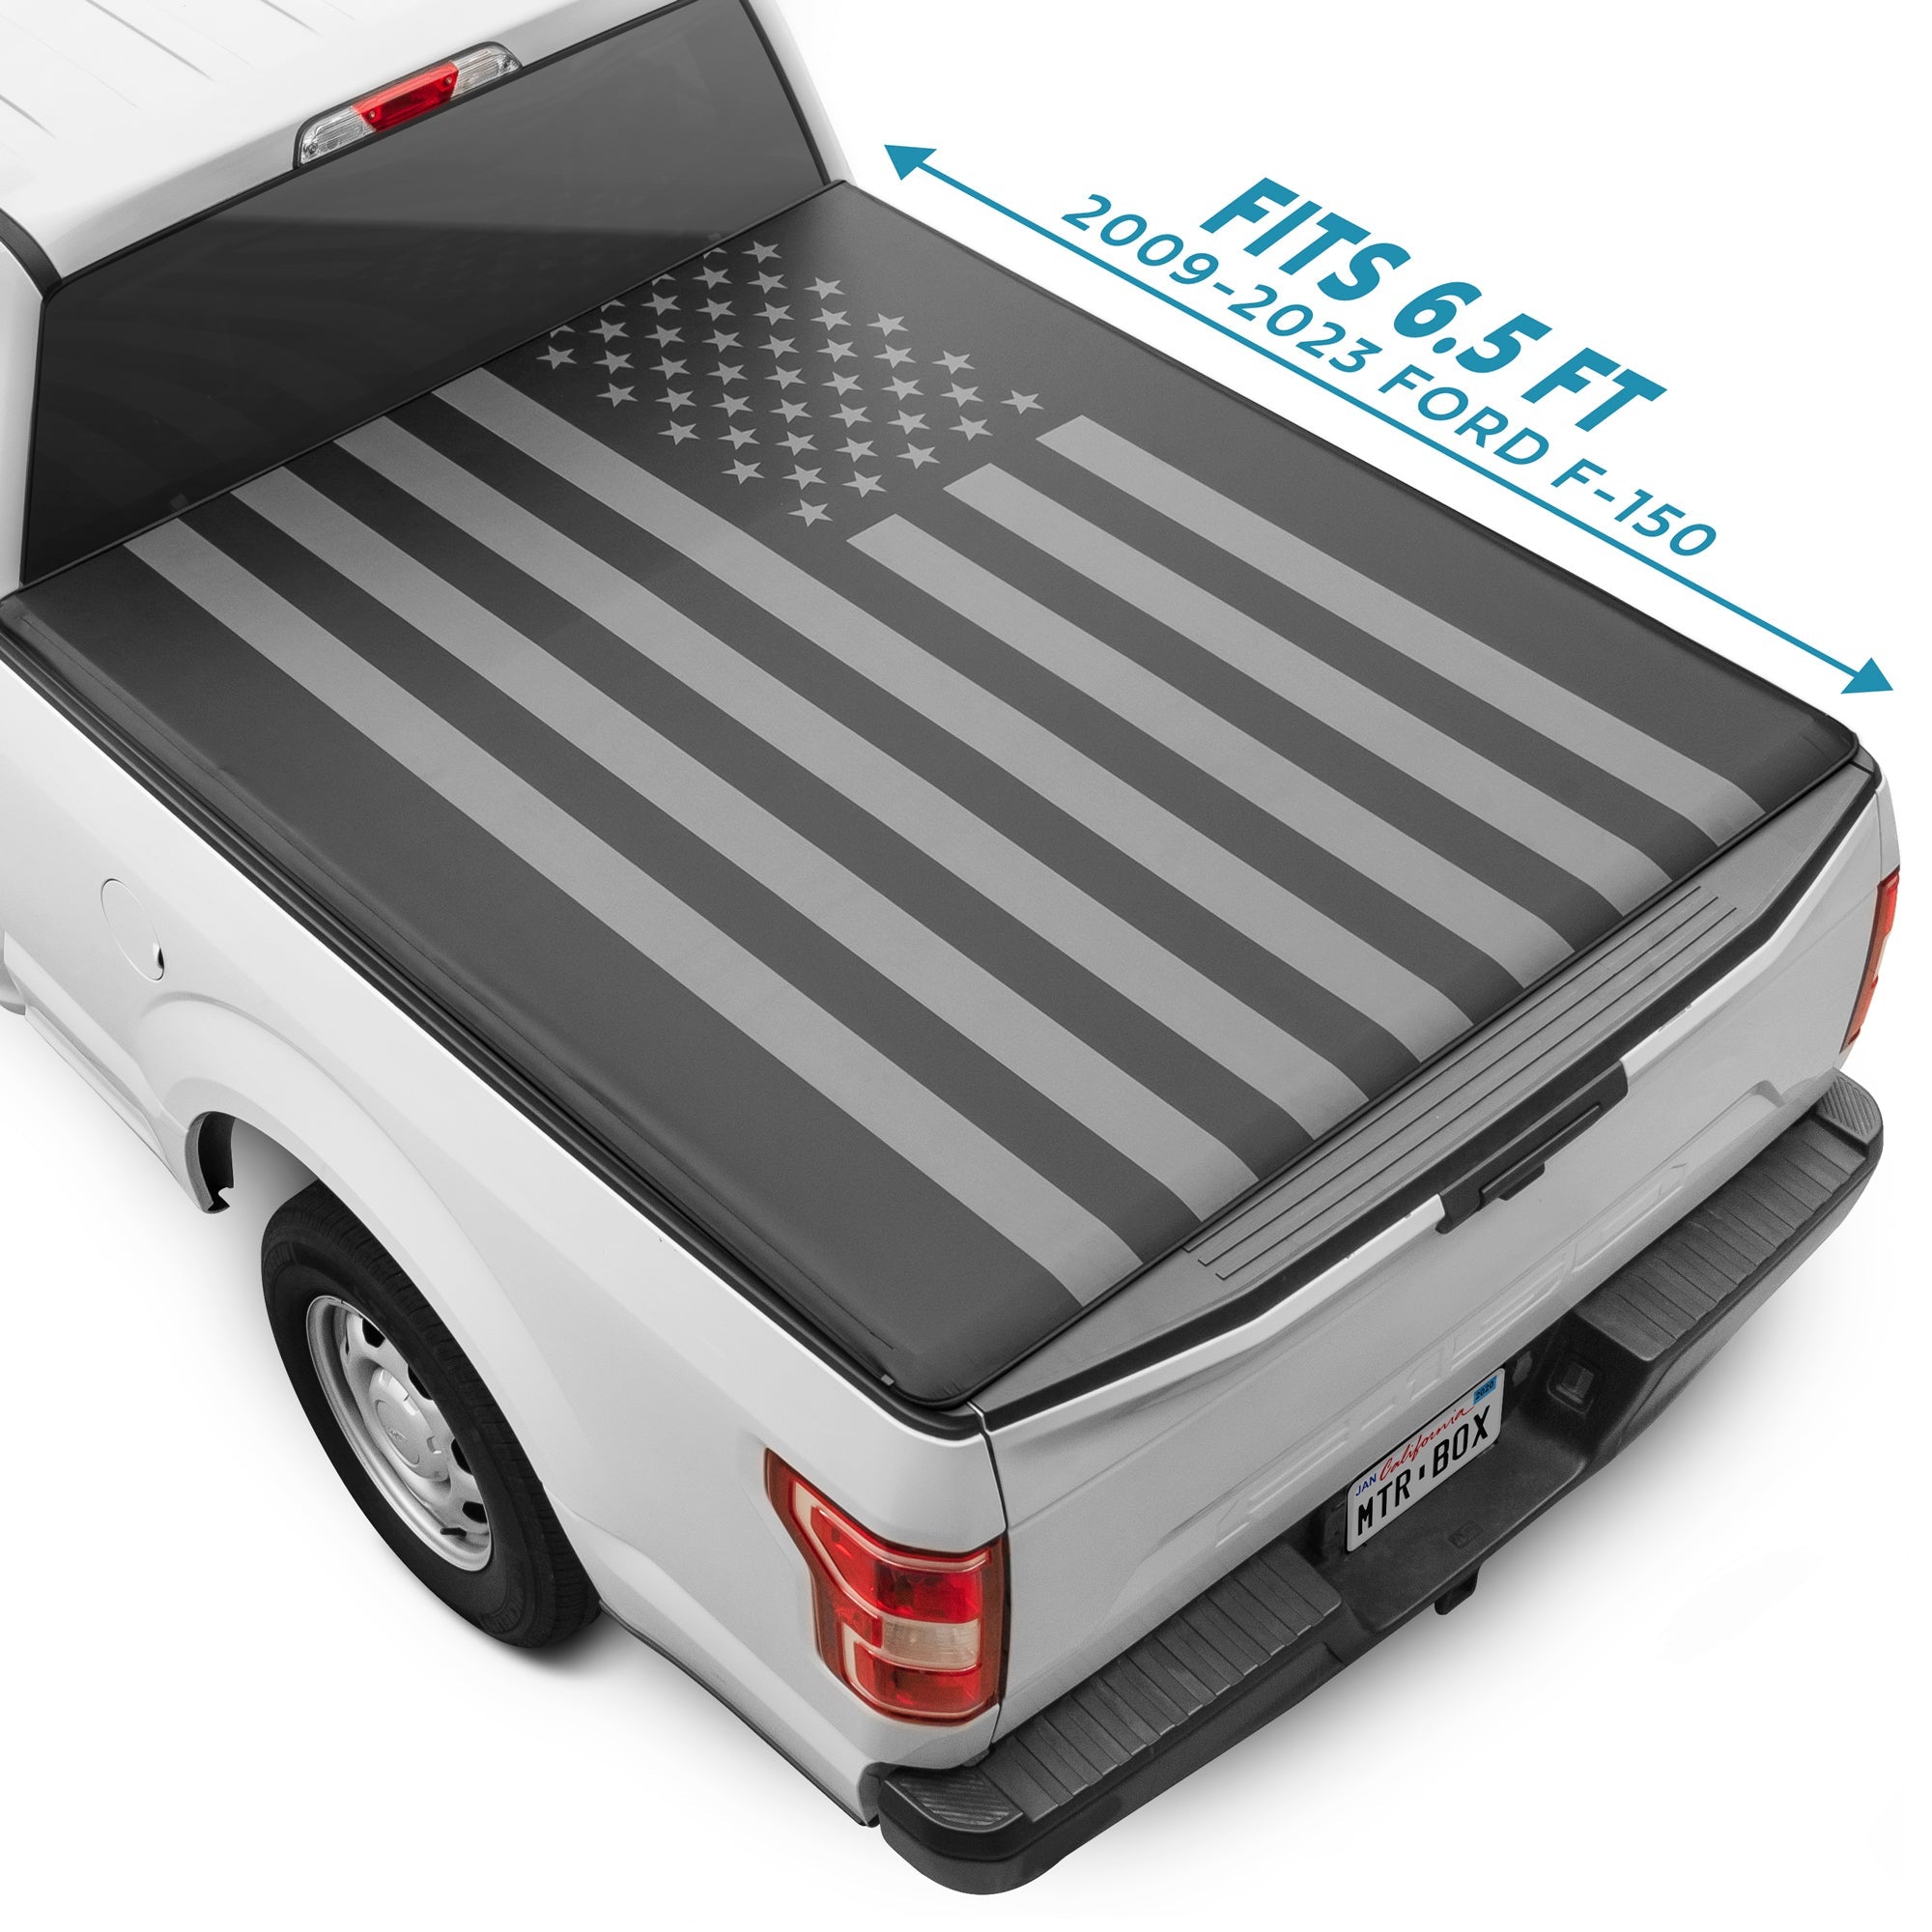 Black Flag Tonneau Cover Soft Roll-up Truck Bed Protector All Weather Retractable for Ford F-150 2009-2024 6.5 ft Bed